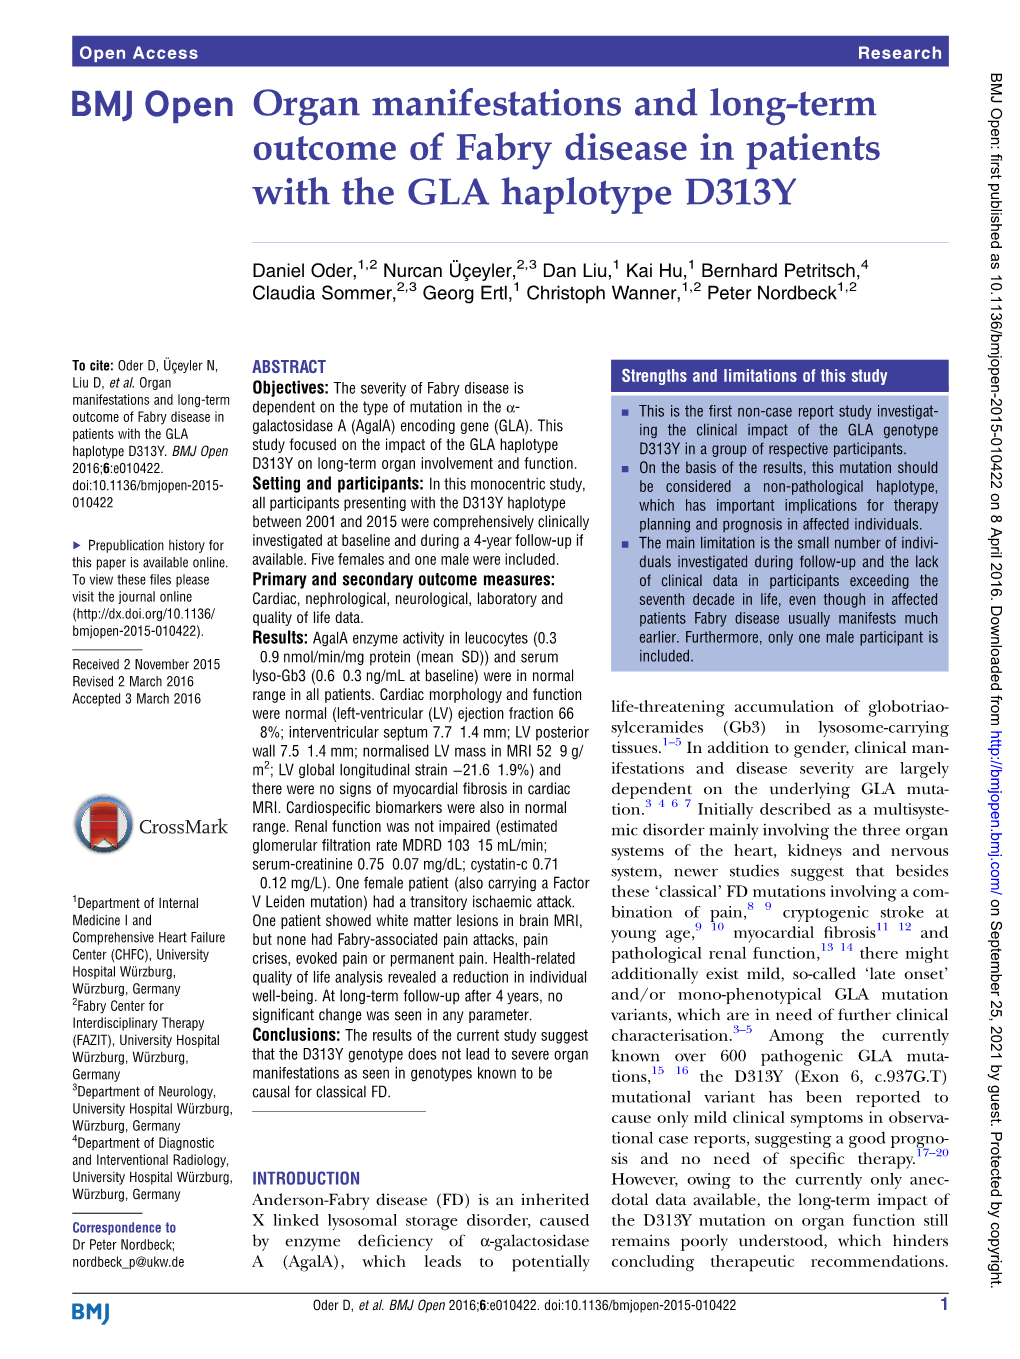 Organ Manifestations and Long-Term Outcome of Fabry Disease in Patients with the GLA Haplotype D313Y